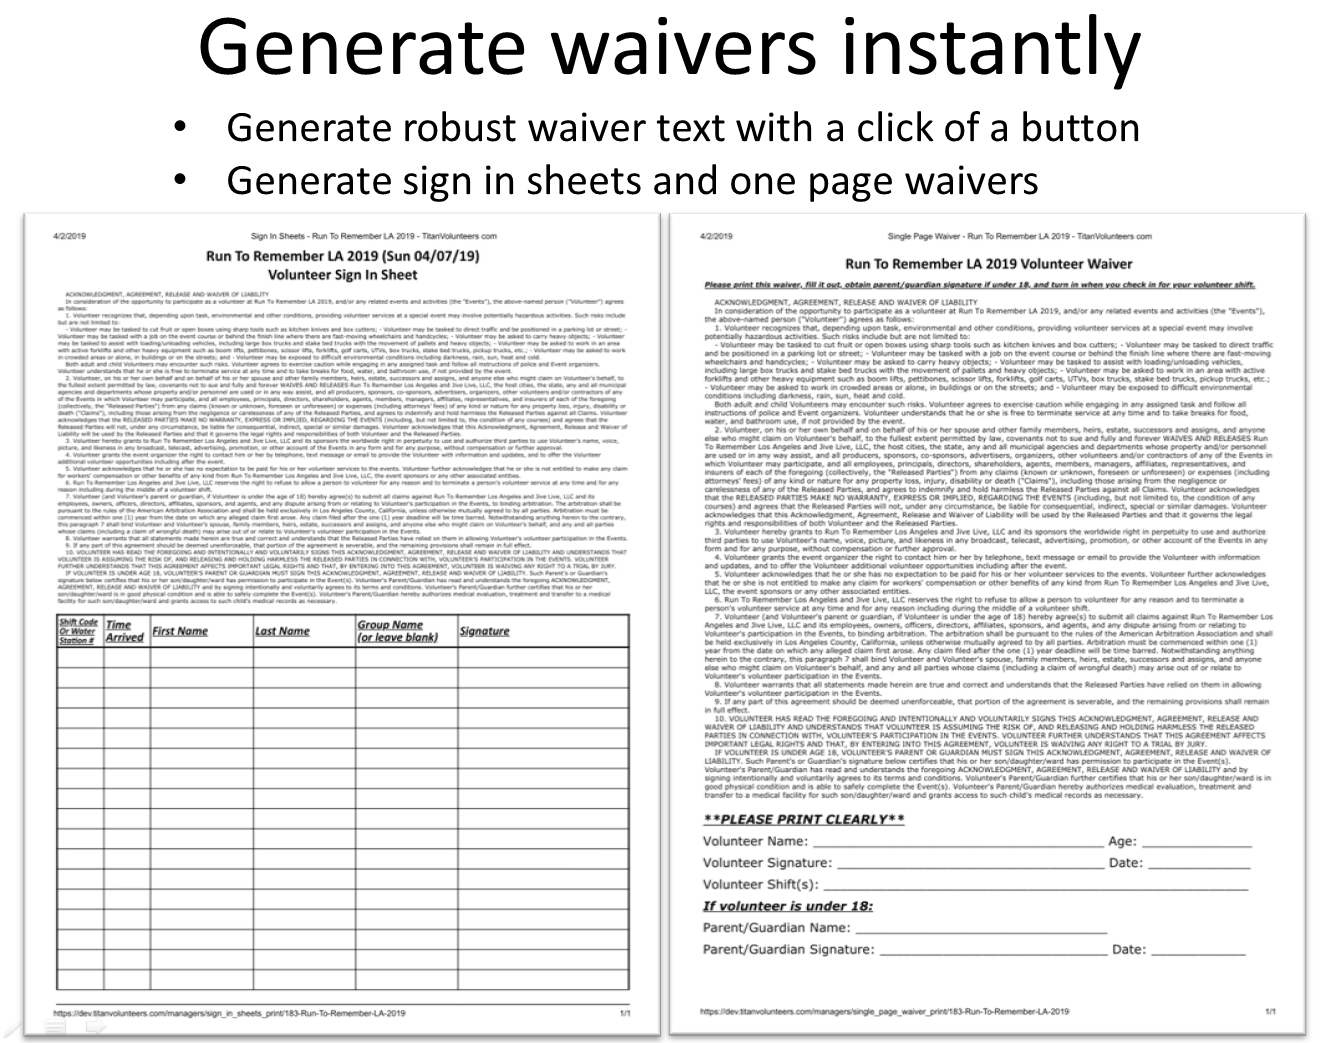 generate_waivers.png